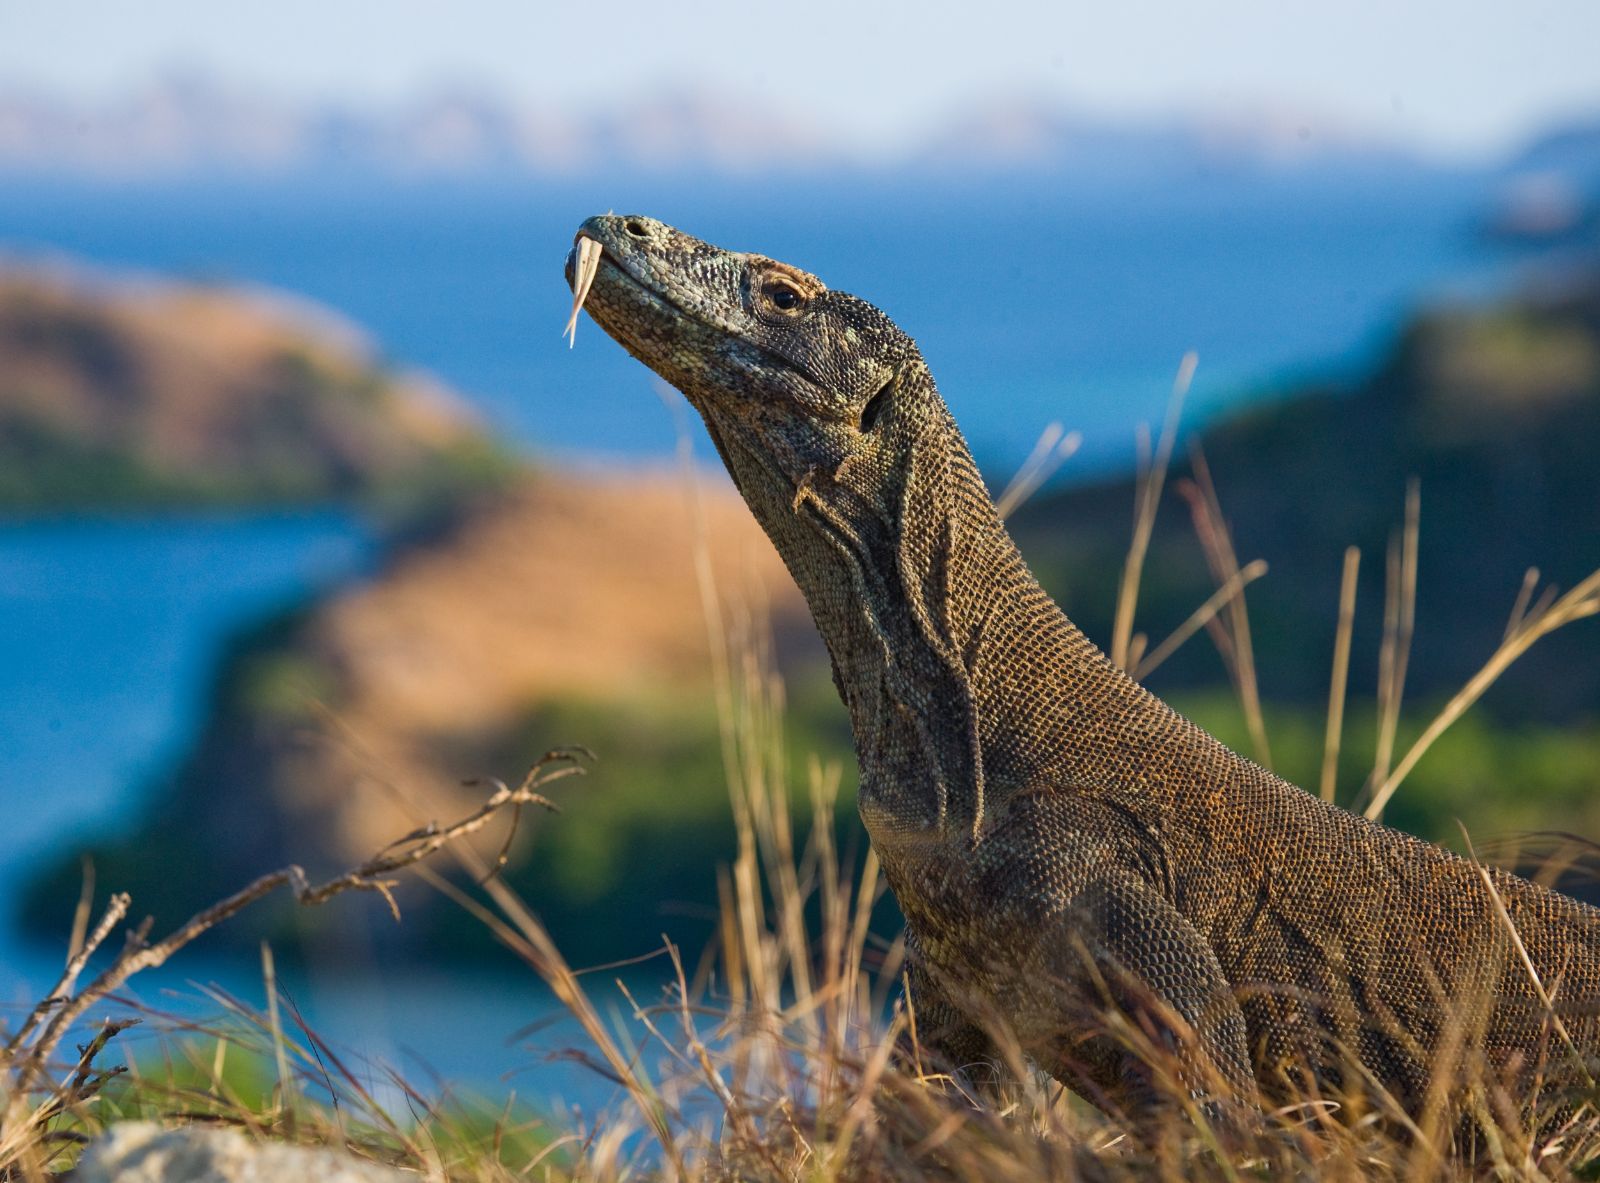 A komodo dragon spotted on the Komodo Islands in Indonesia